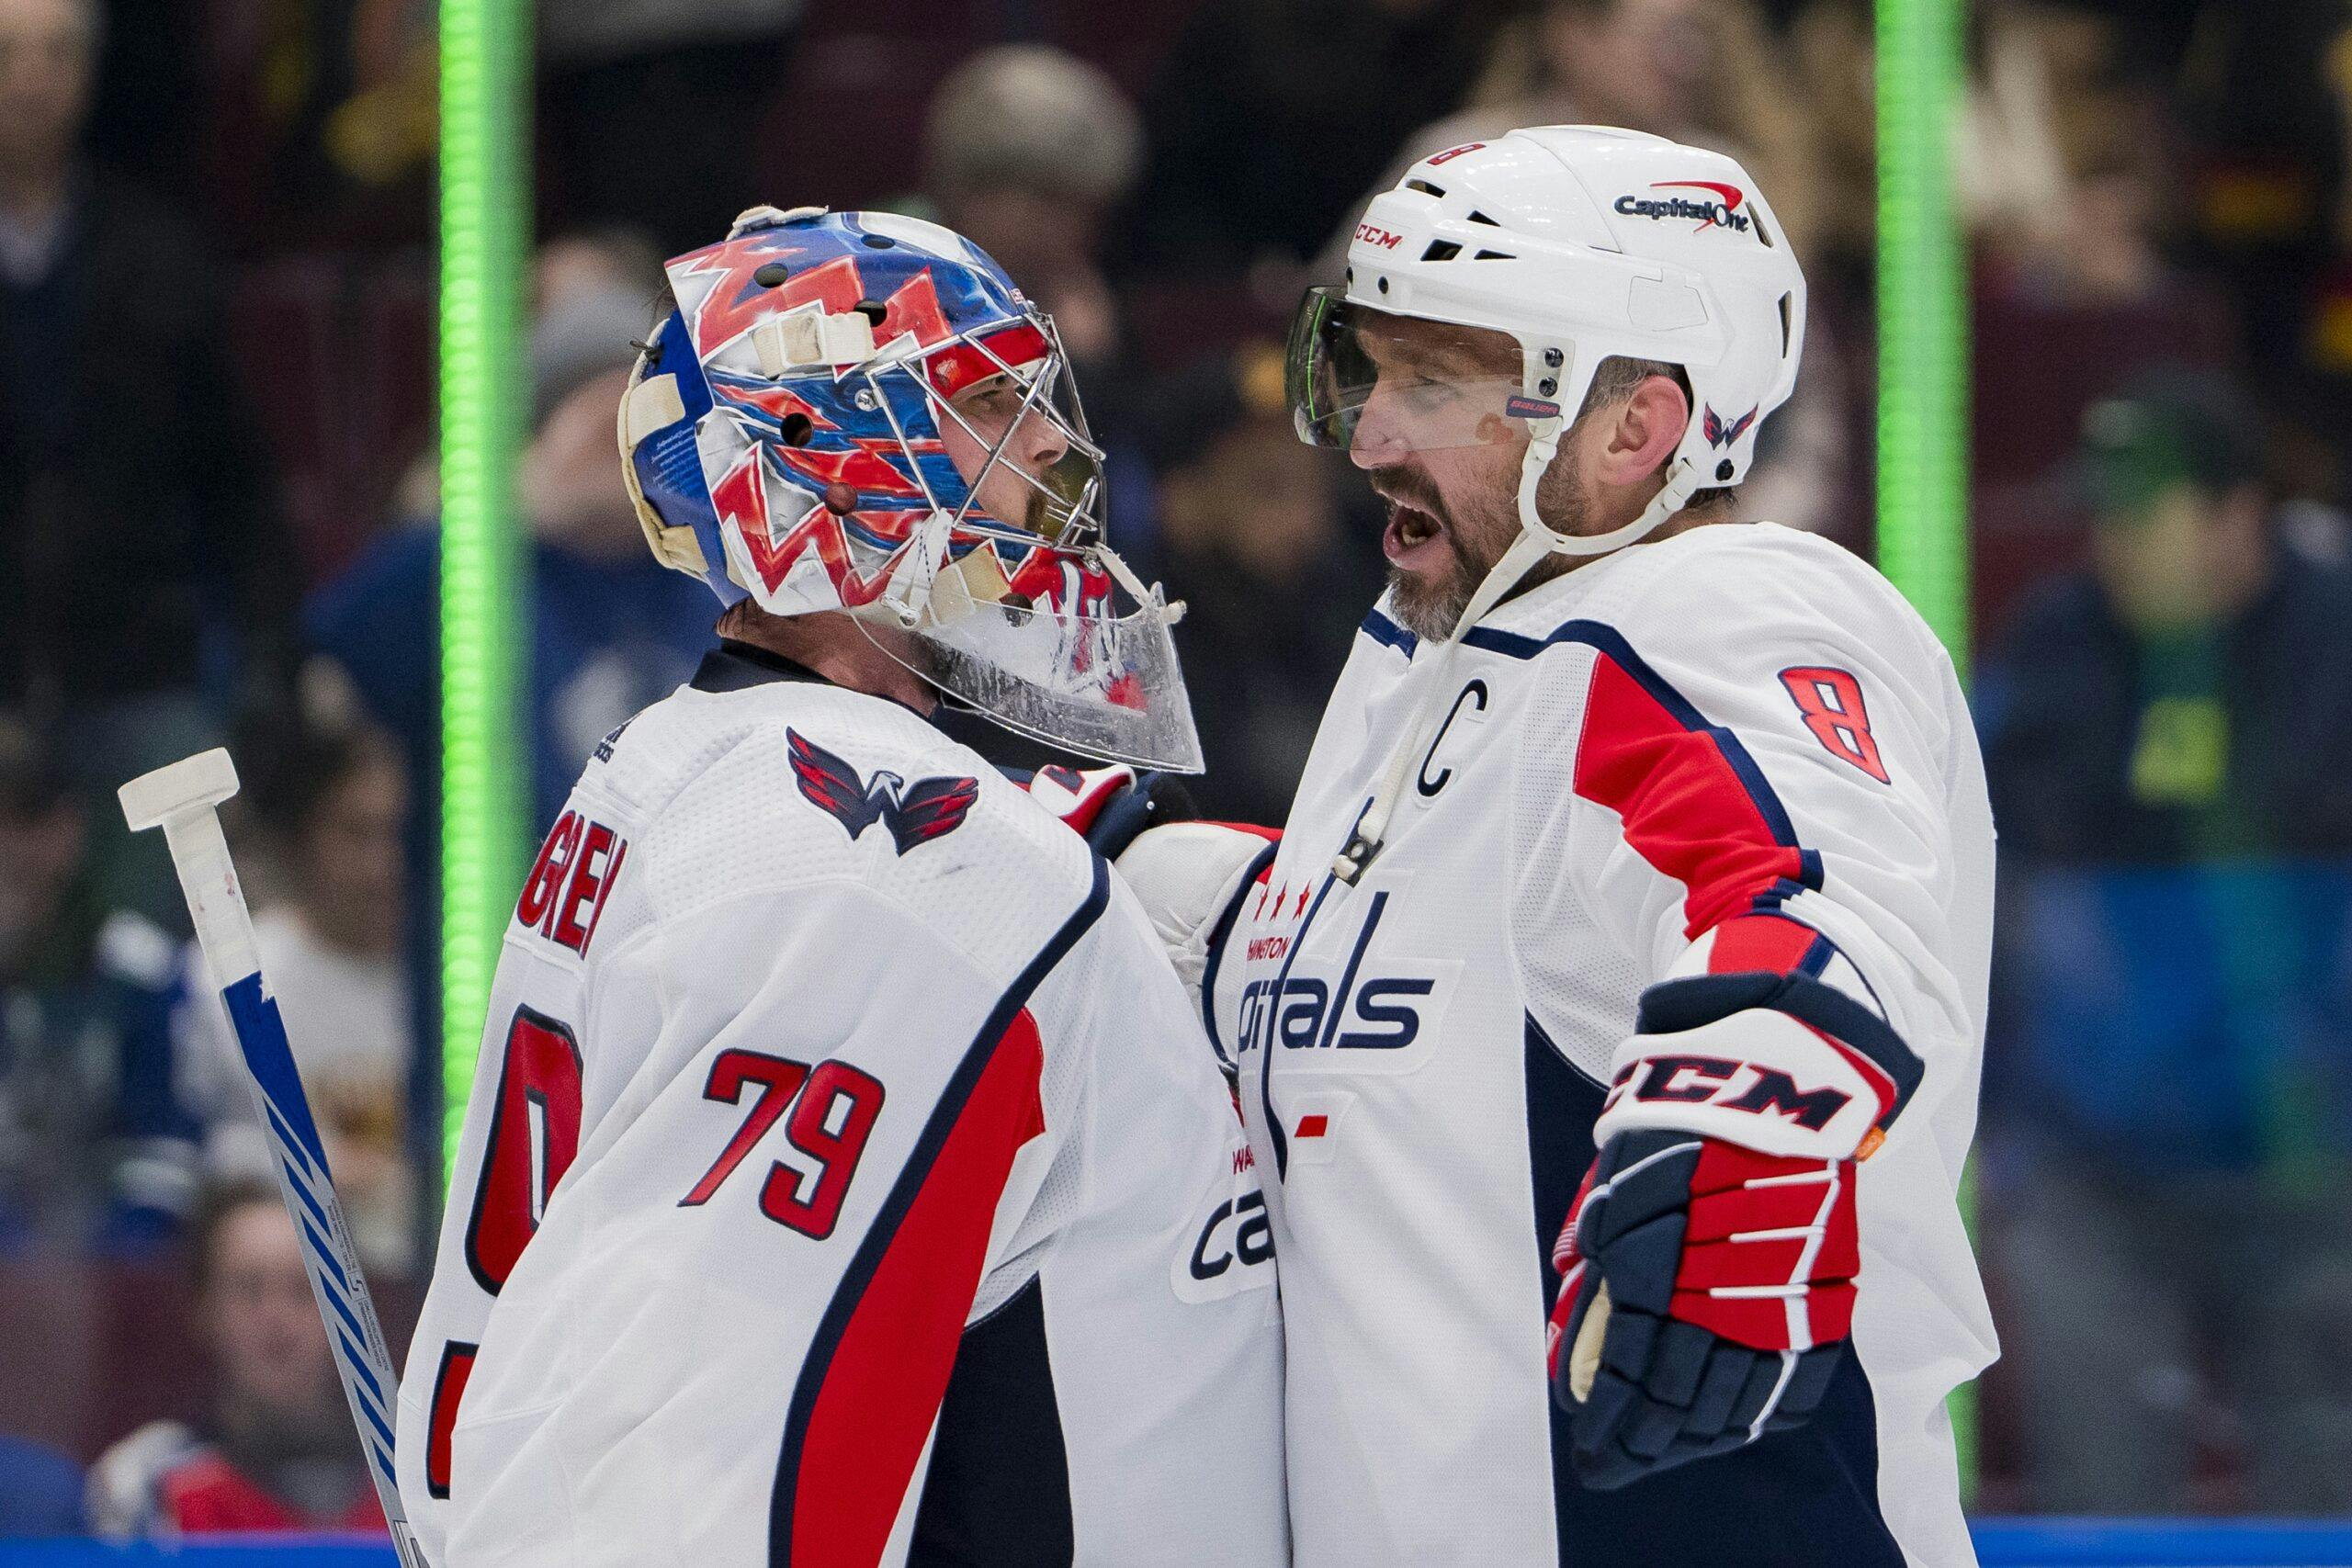 Washington Capitals aren’t giving up as team chases playoff spot